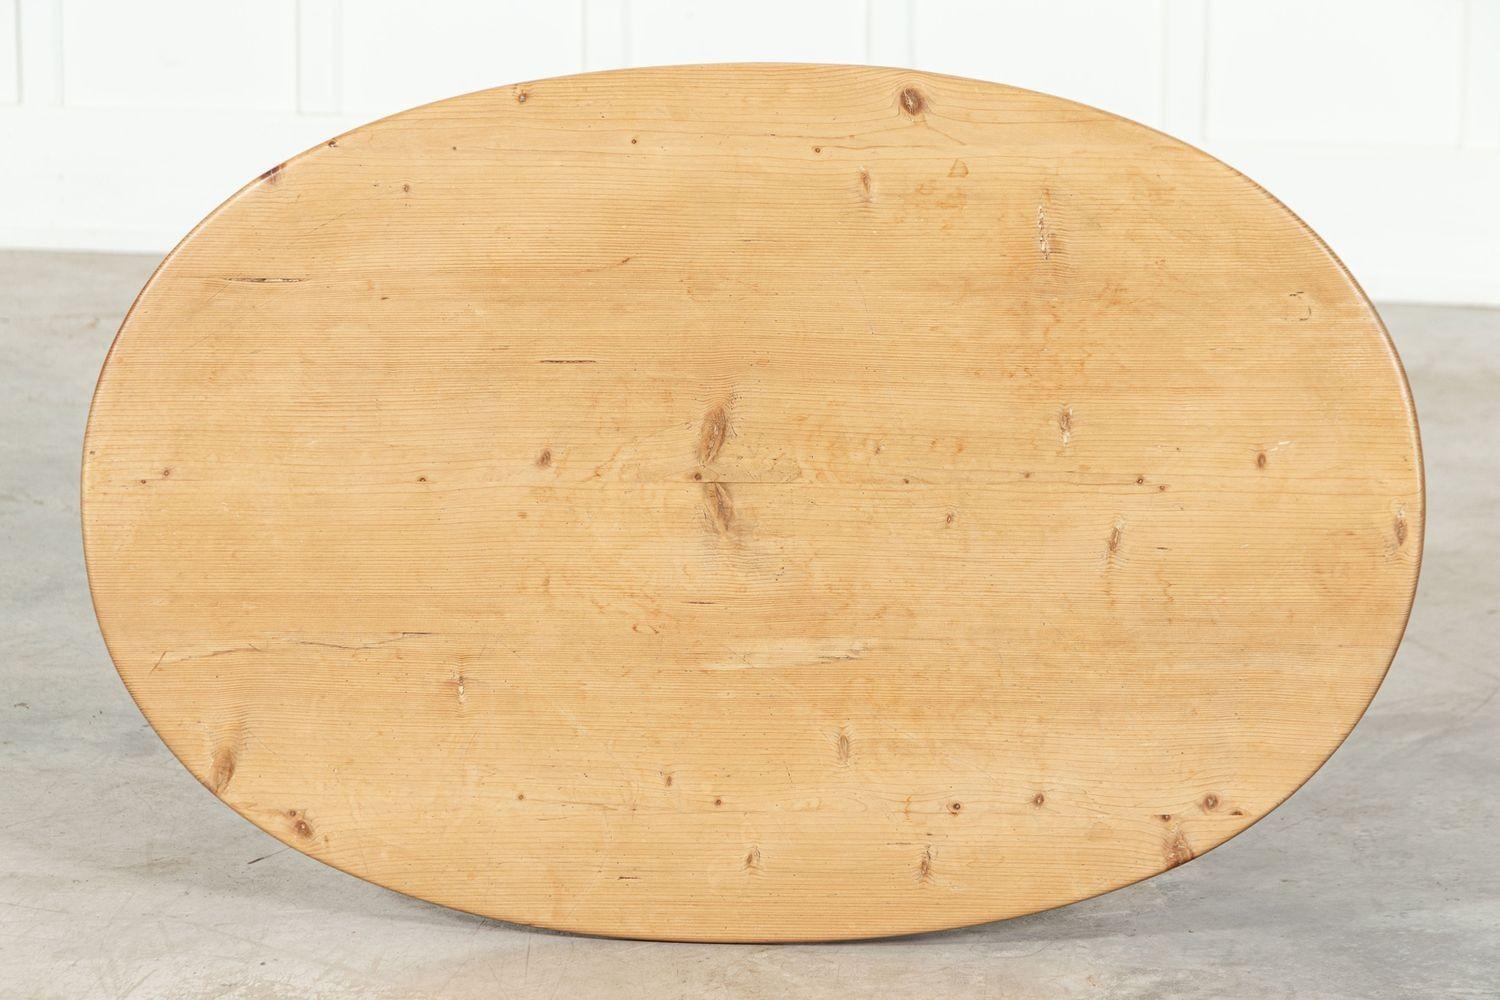 circa 1890
19thC French Fruitwood & Pine Oval Table
sku 1800
W109 x D72 x H79 cm
Weight 24 kg